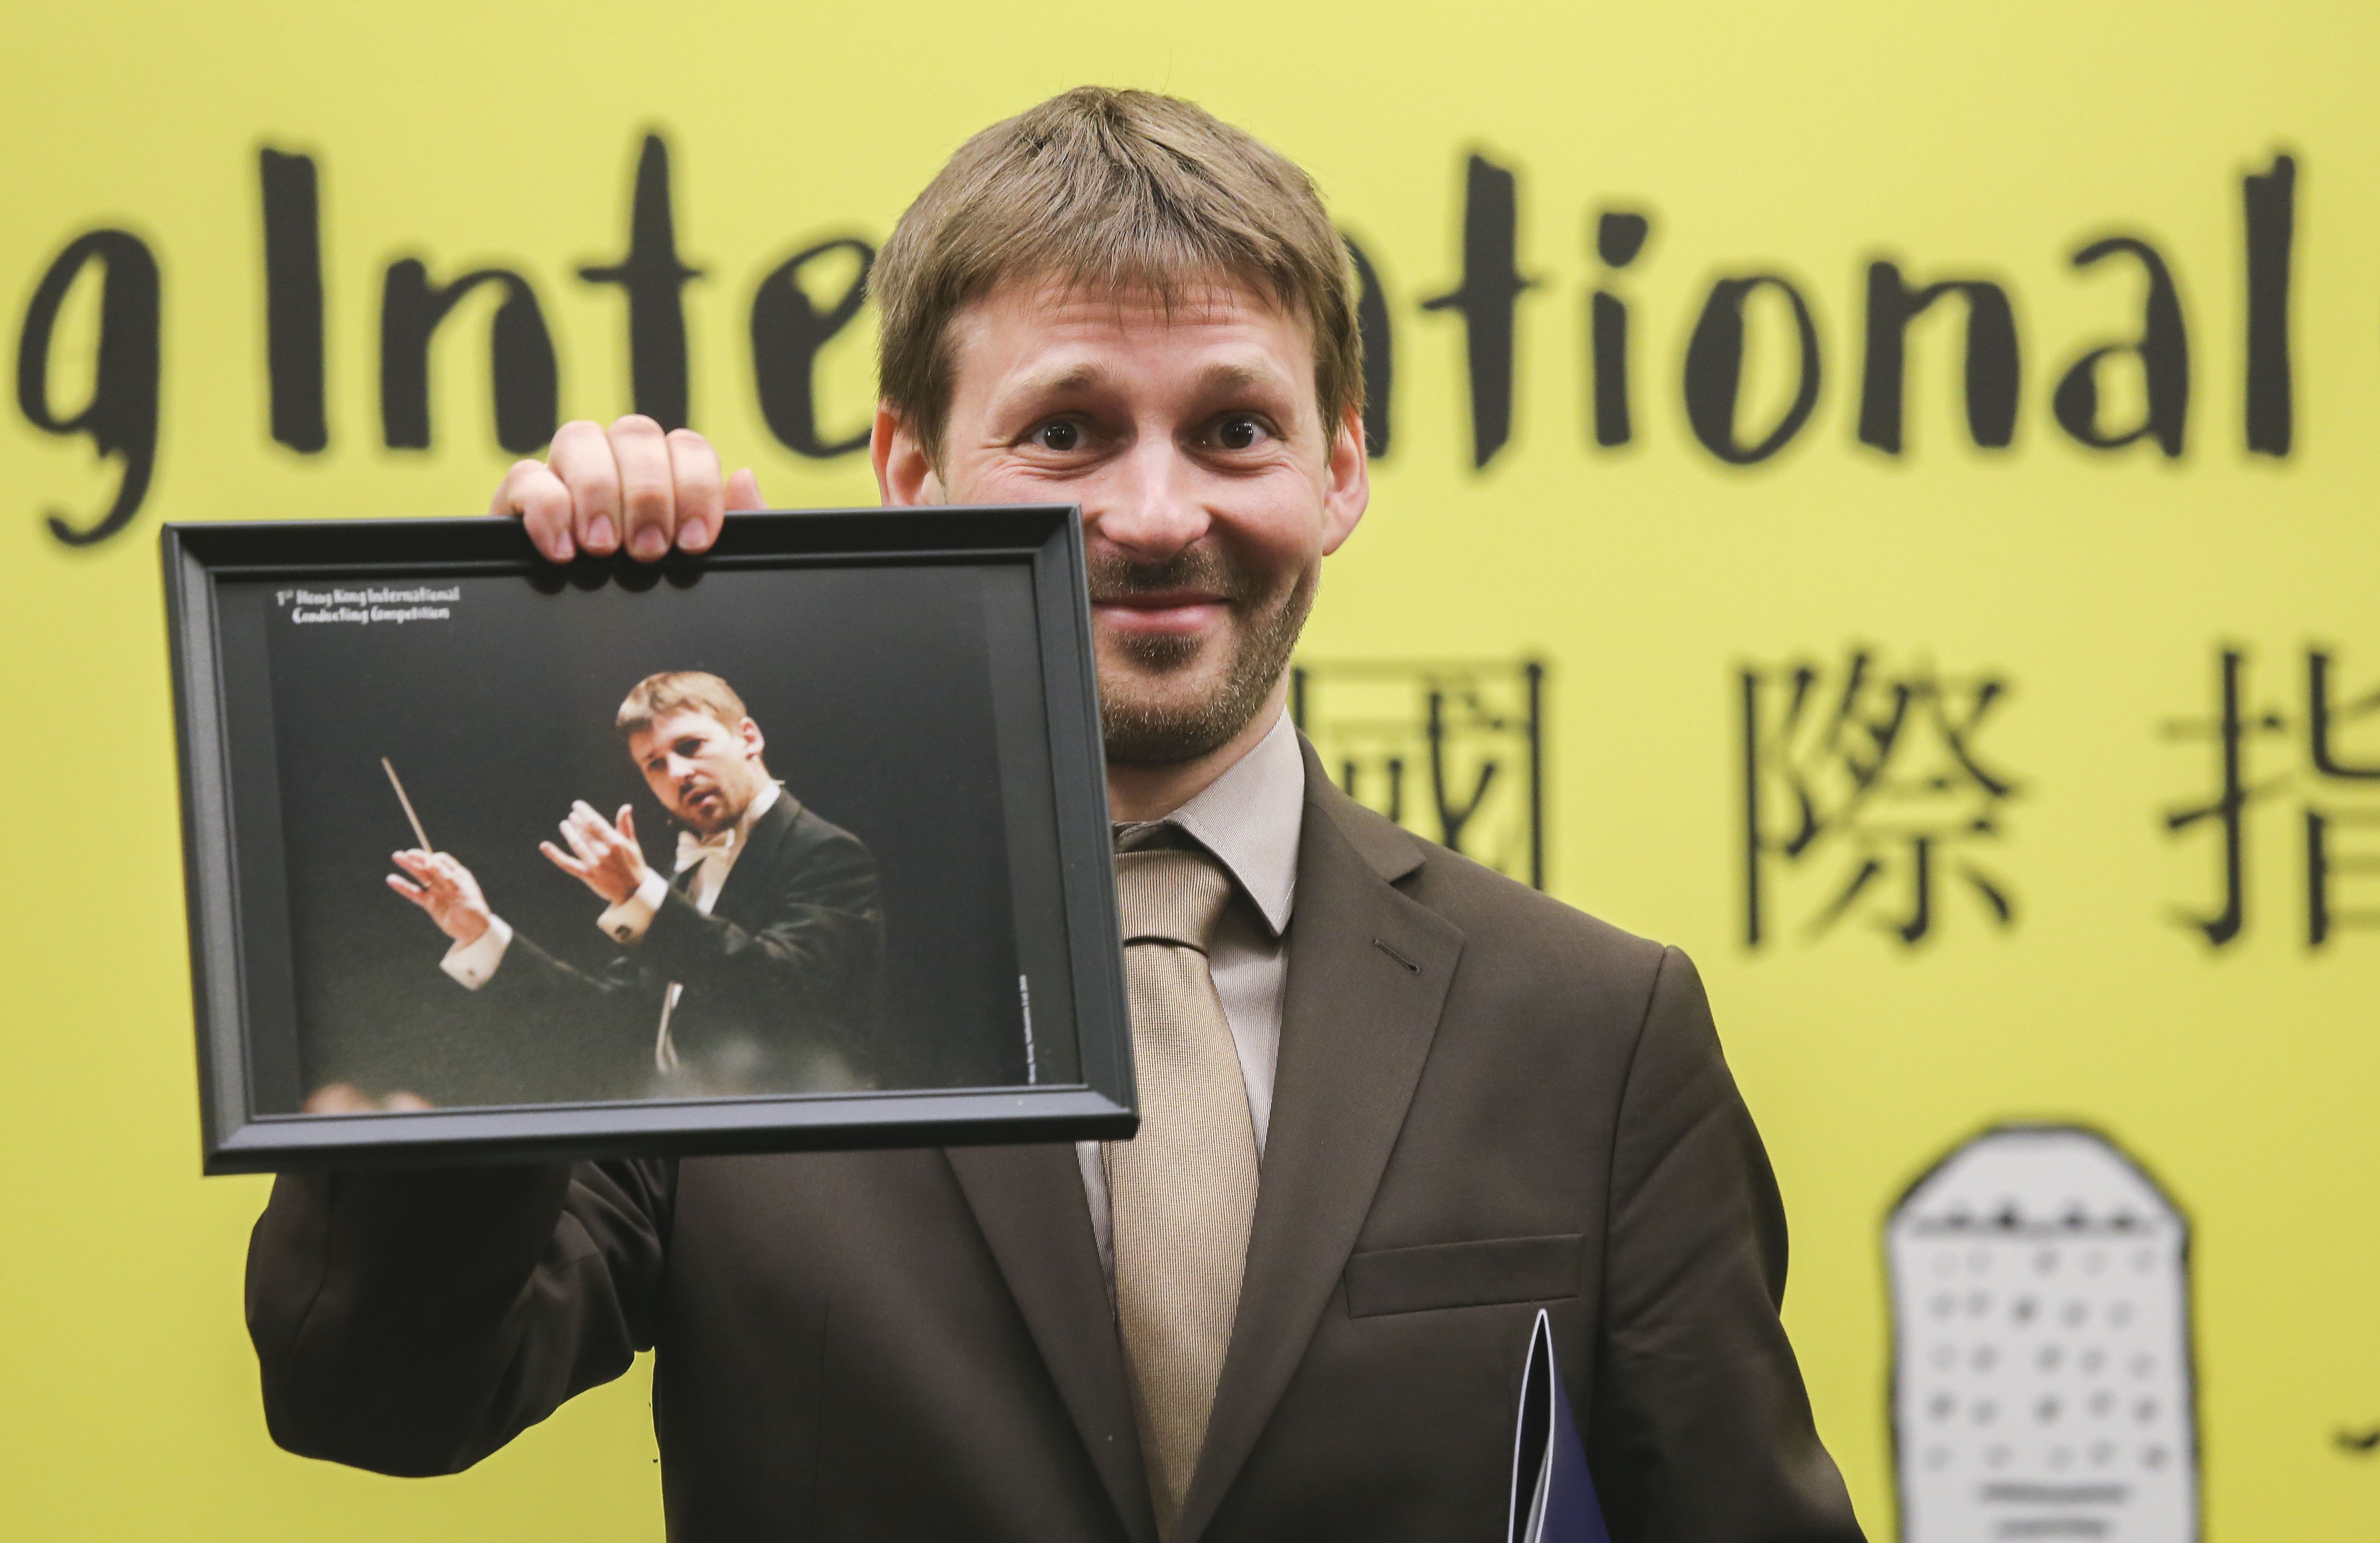 Gabor Kali (pictured) scored the highest mark from an international jury headed by Yip Wing-sie, music director of the Hong Kong Sinfonietta, and Christoph Poppen, its principal guest conductor. Photo: Dickson Lee